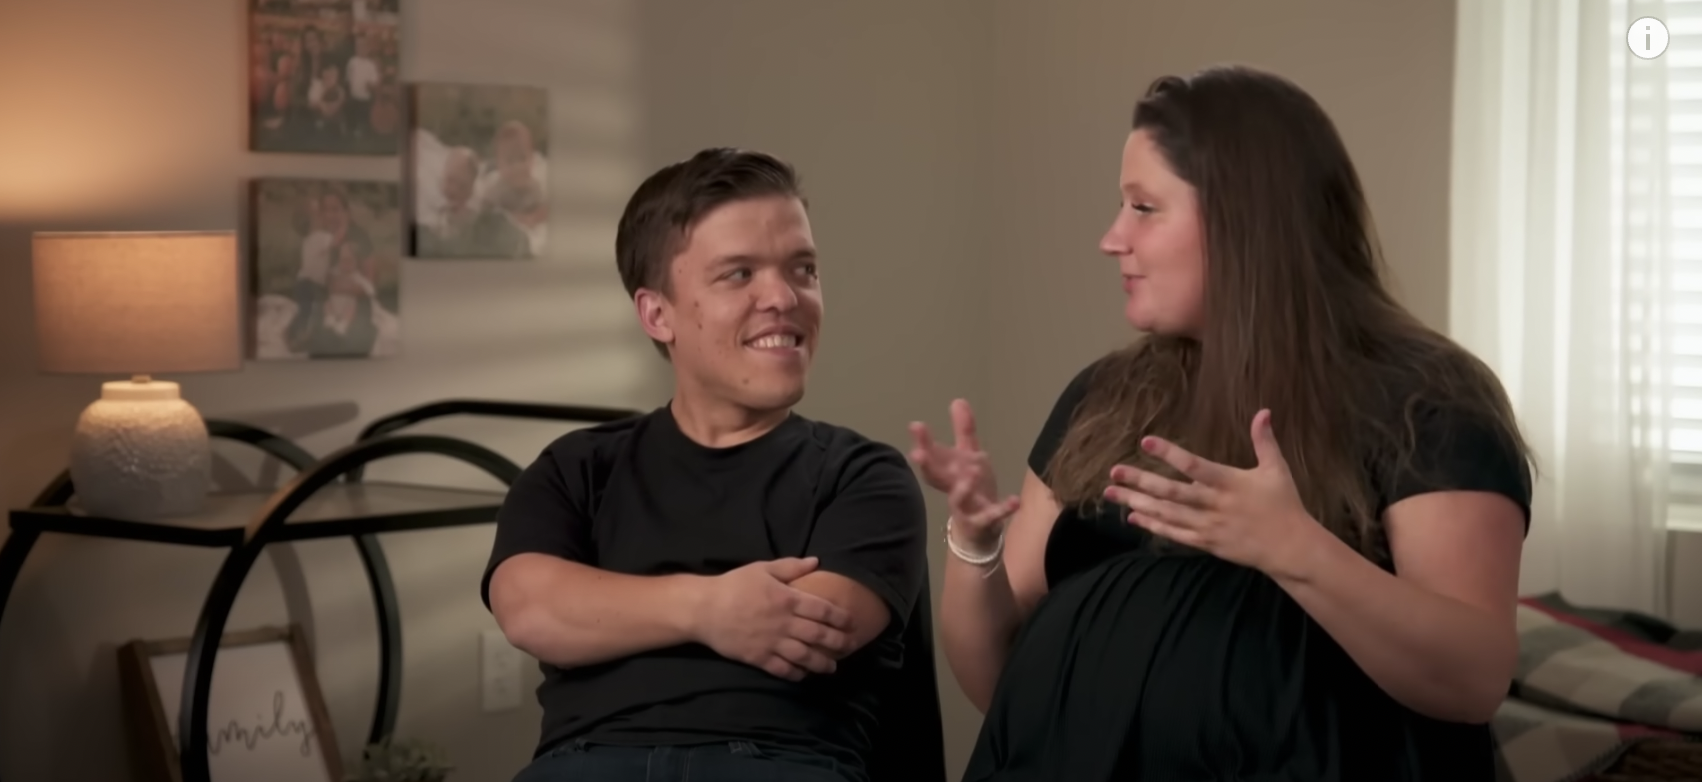 Zach and Tori Roloff sitting next to each other on 'Little People, Big World'